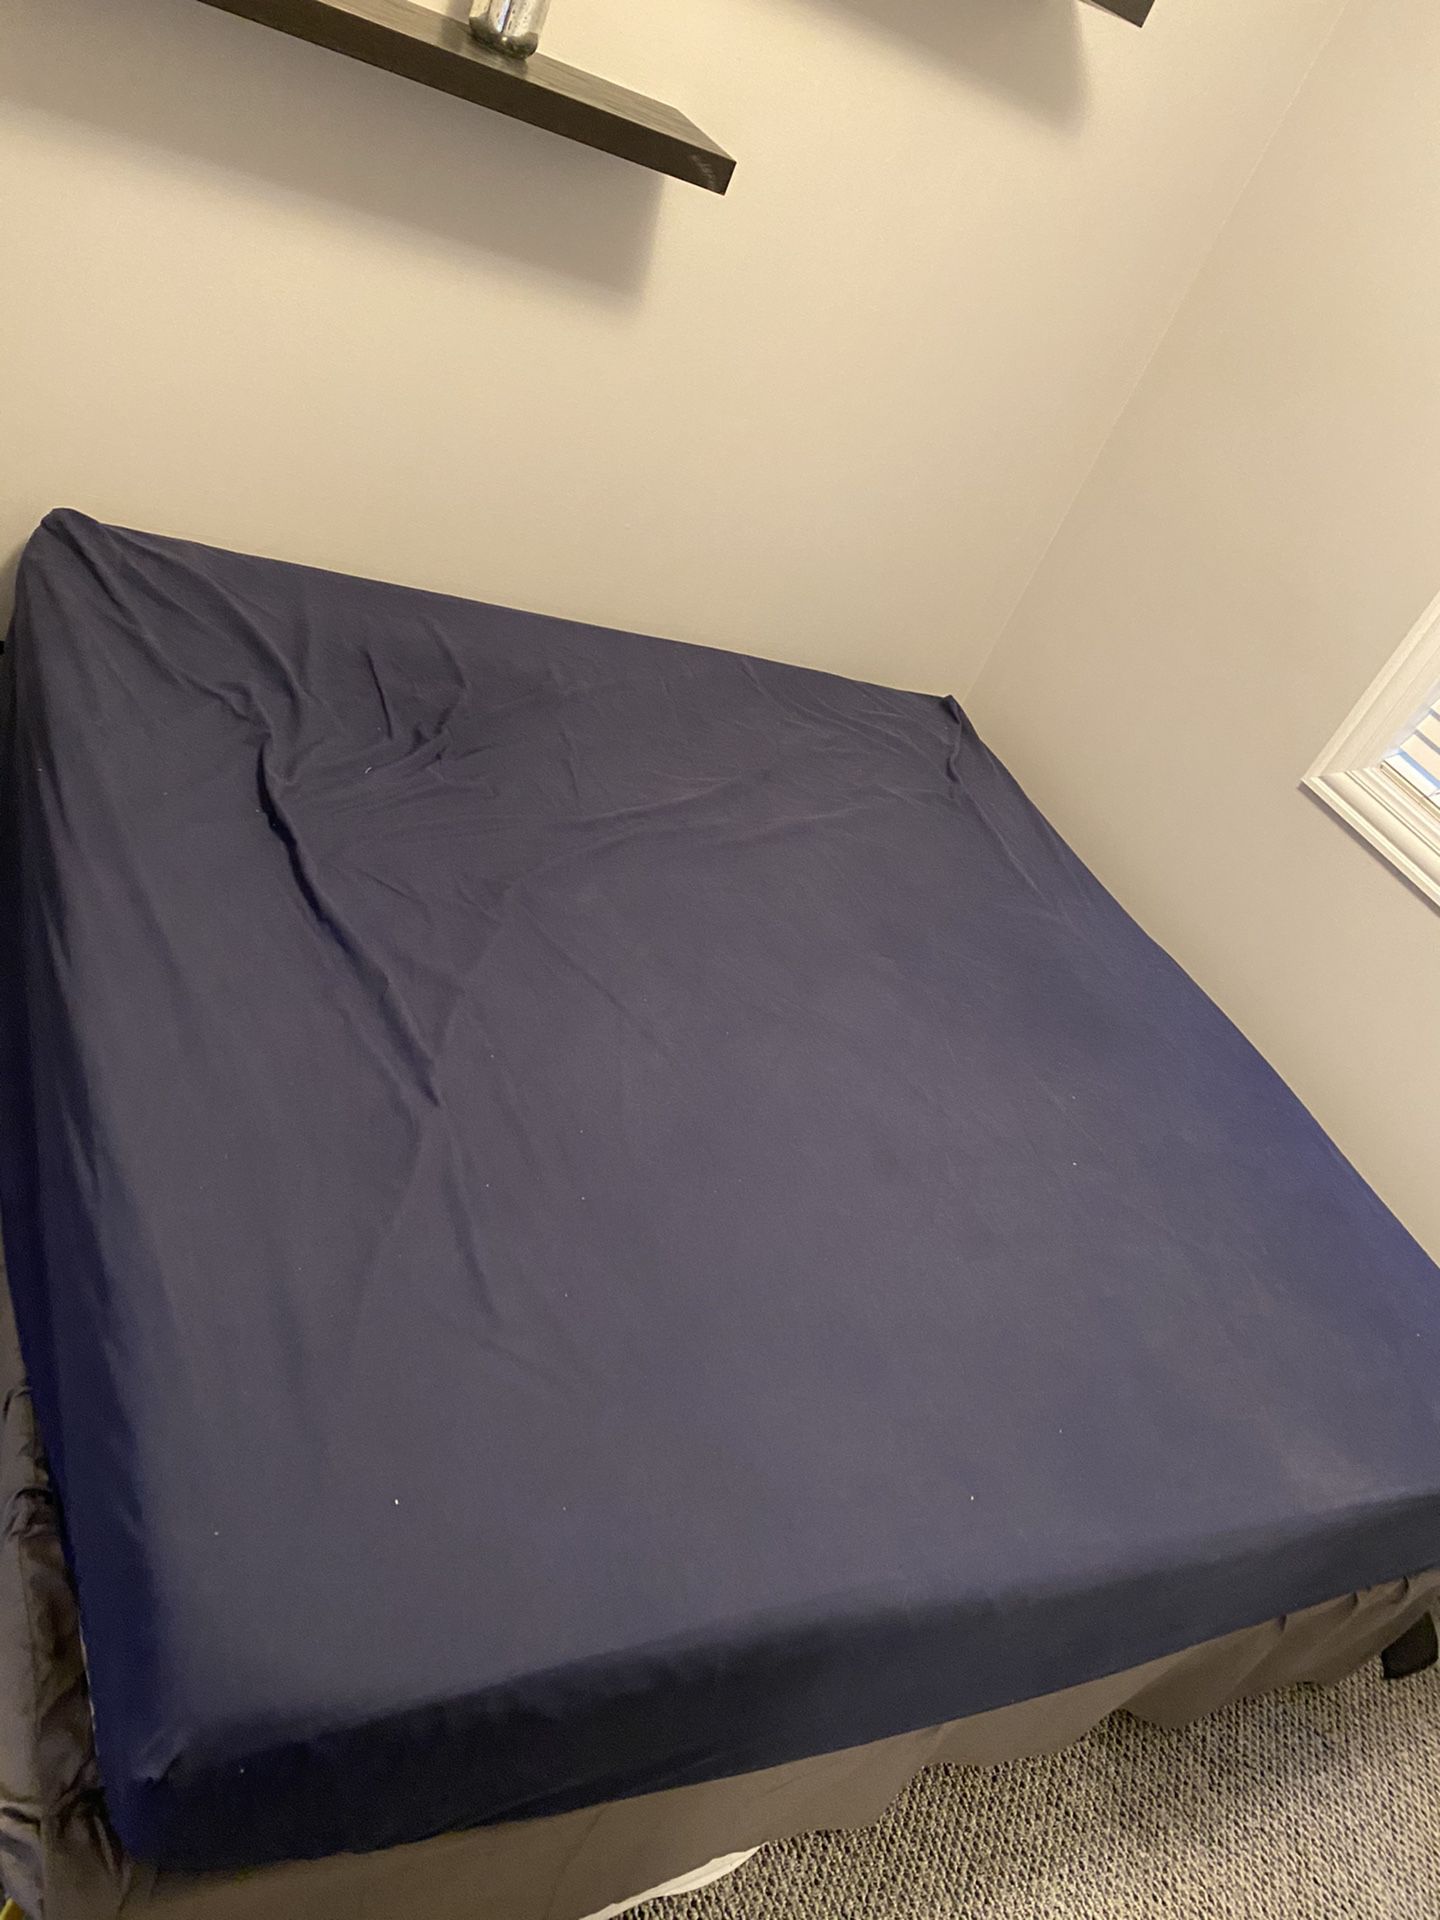 Free King/Full Mattress and bed frame